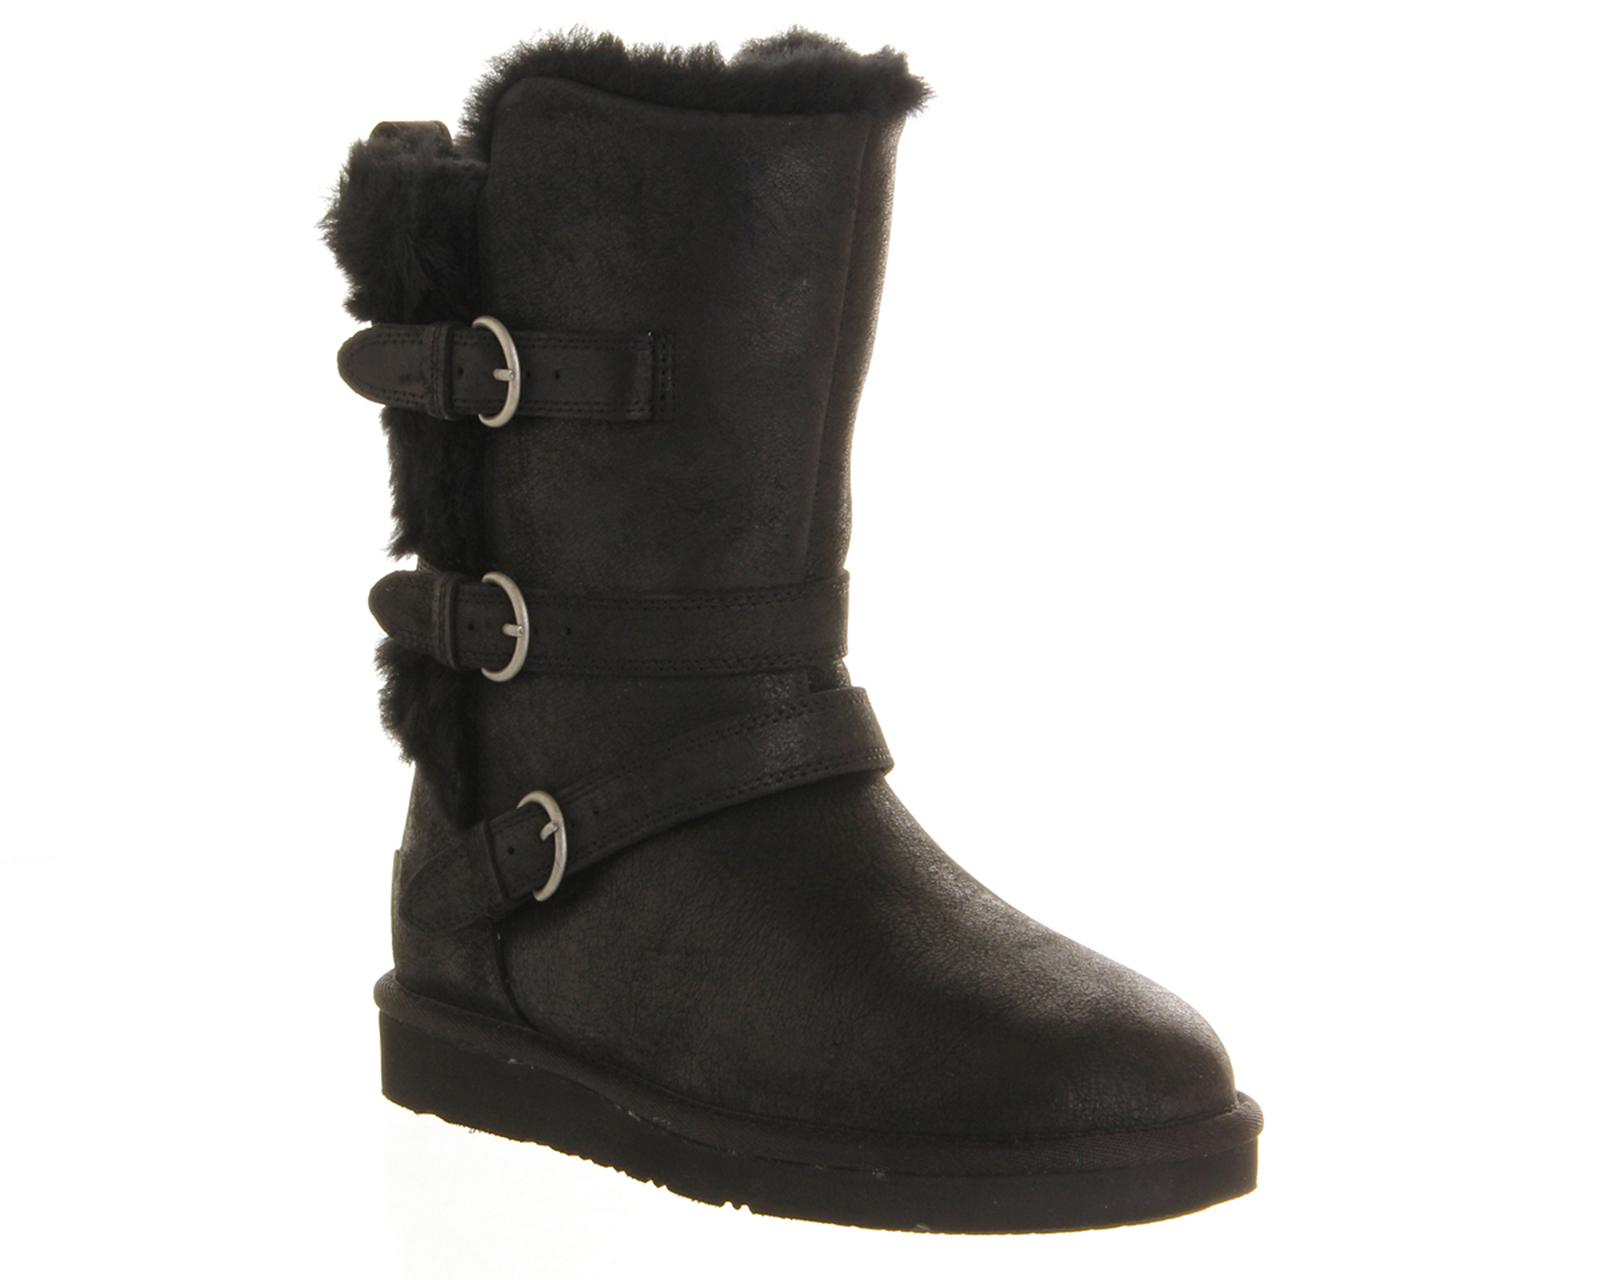 black uggs with buckle